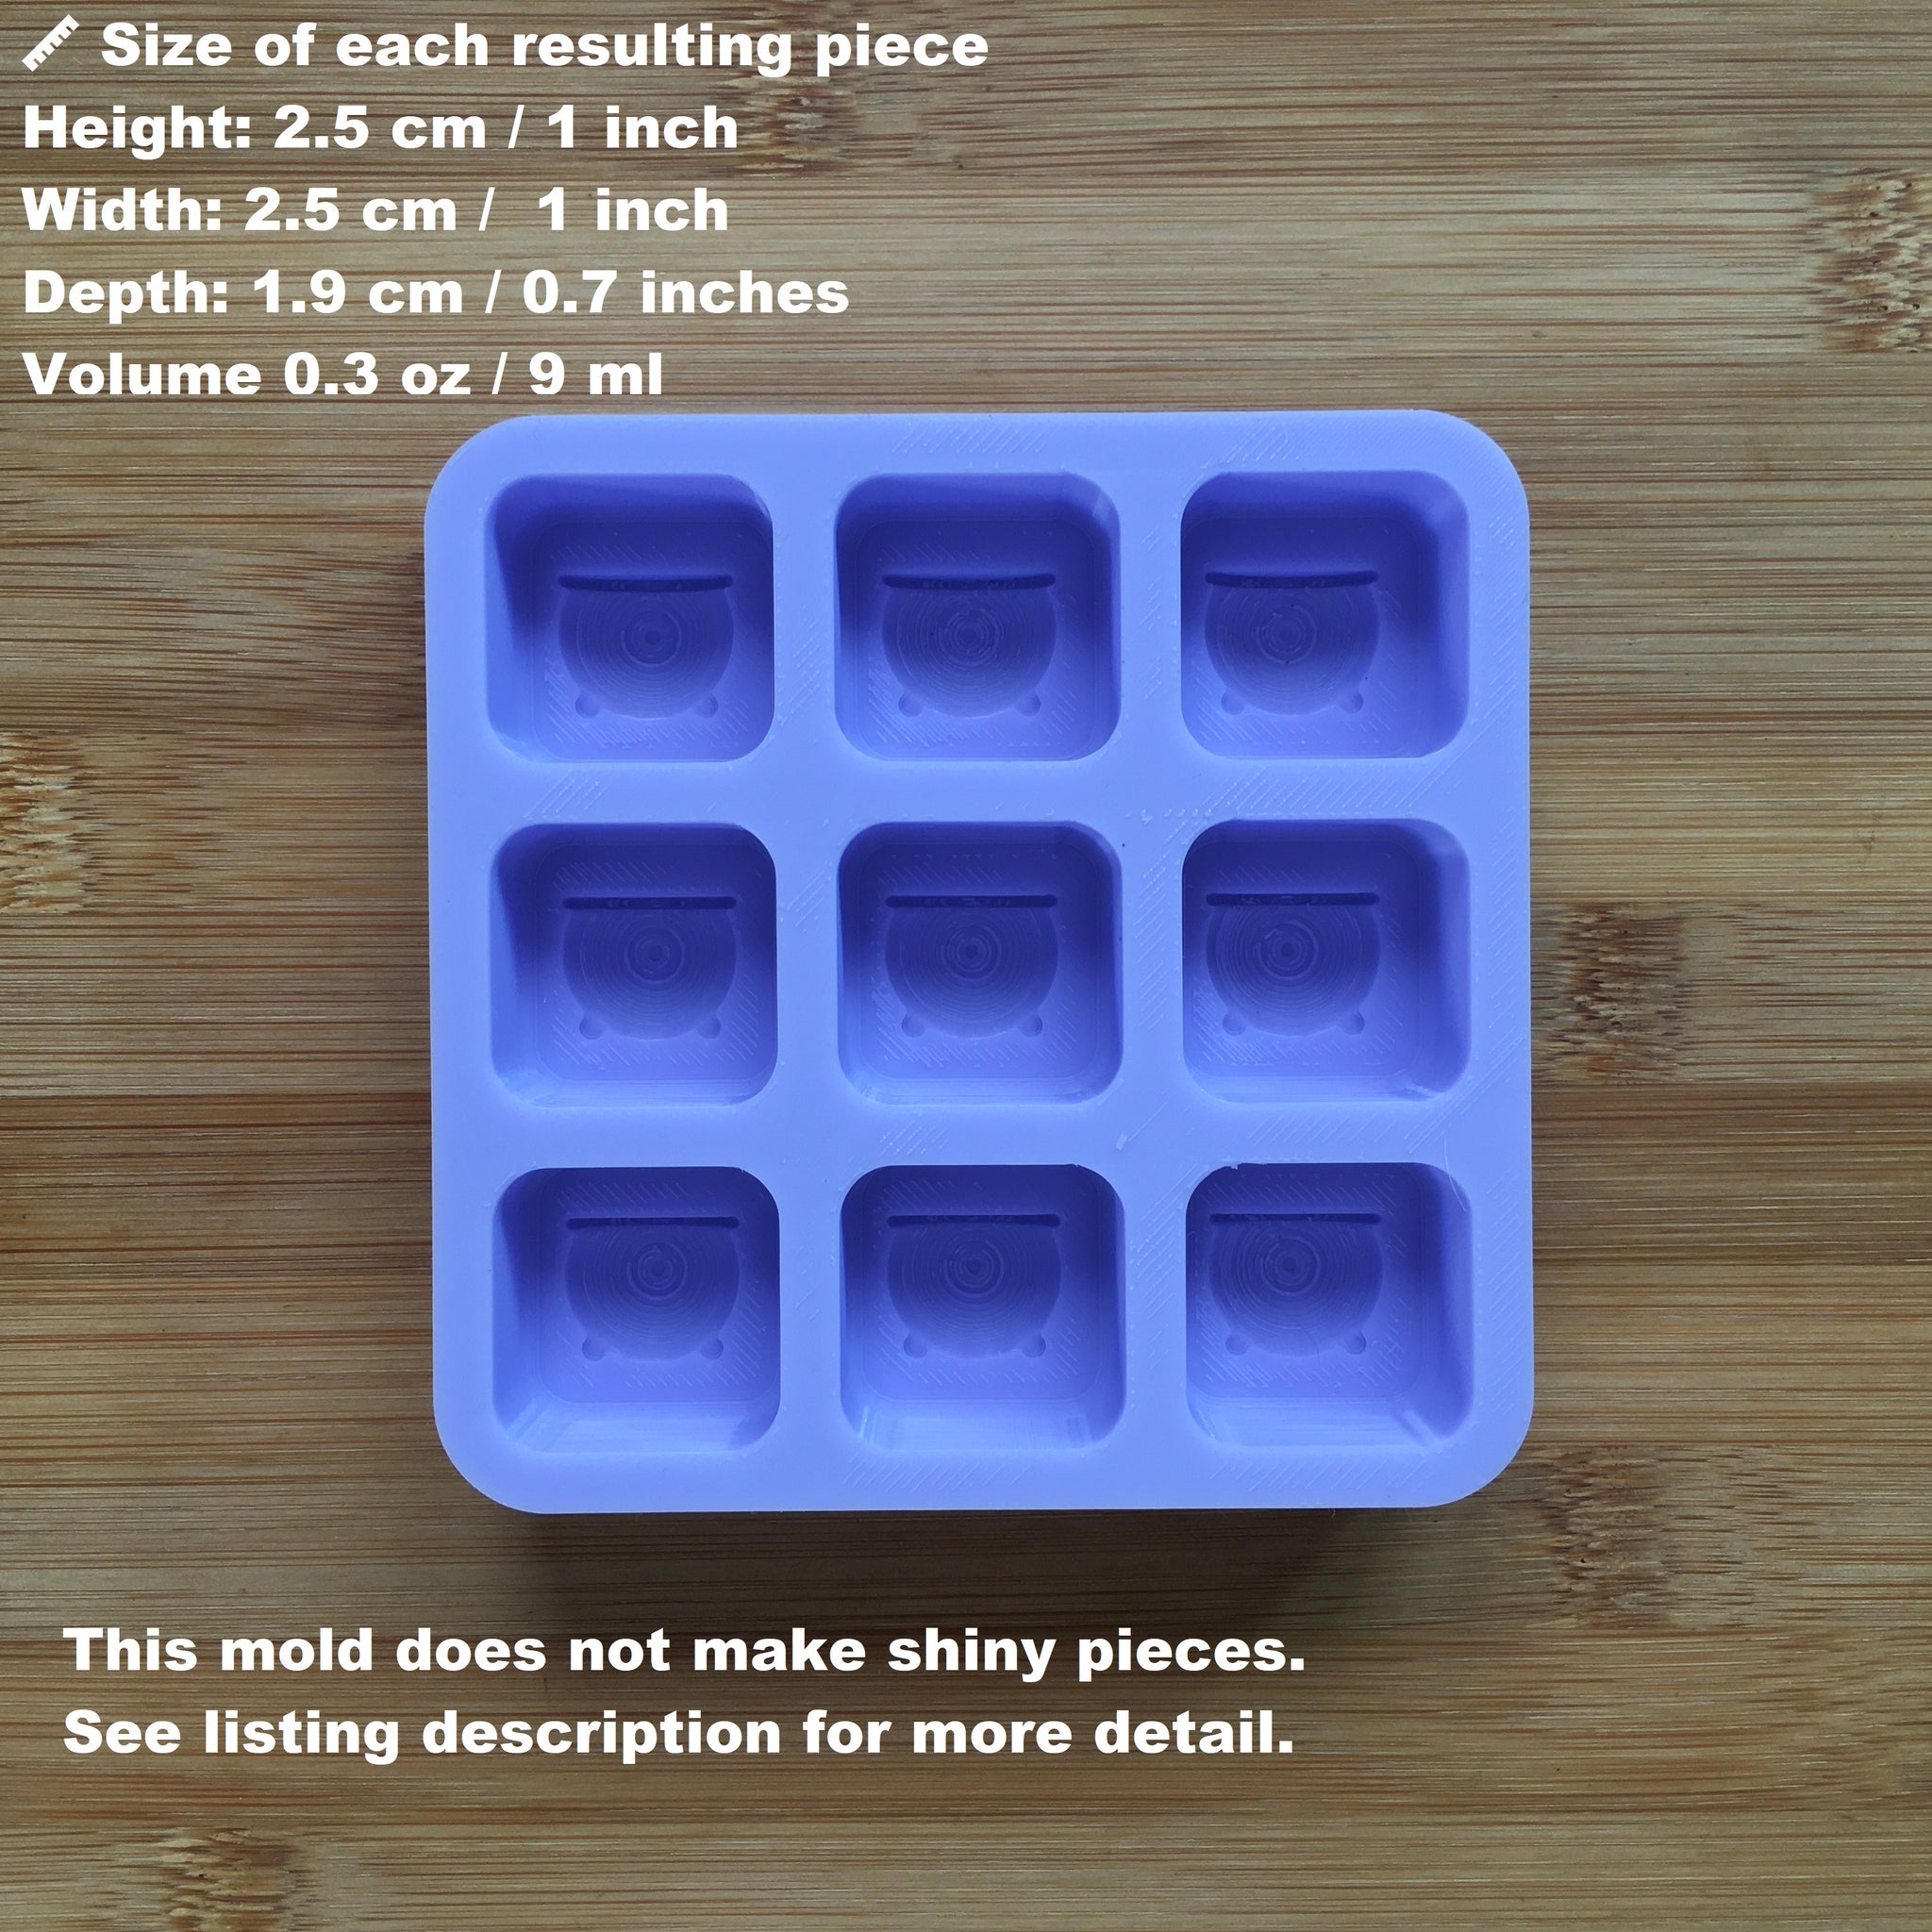  Wax Melt Molds Silicone,Rectangle Silicone Wax Melt